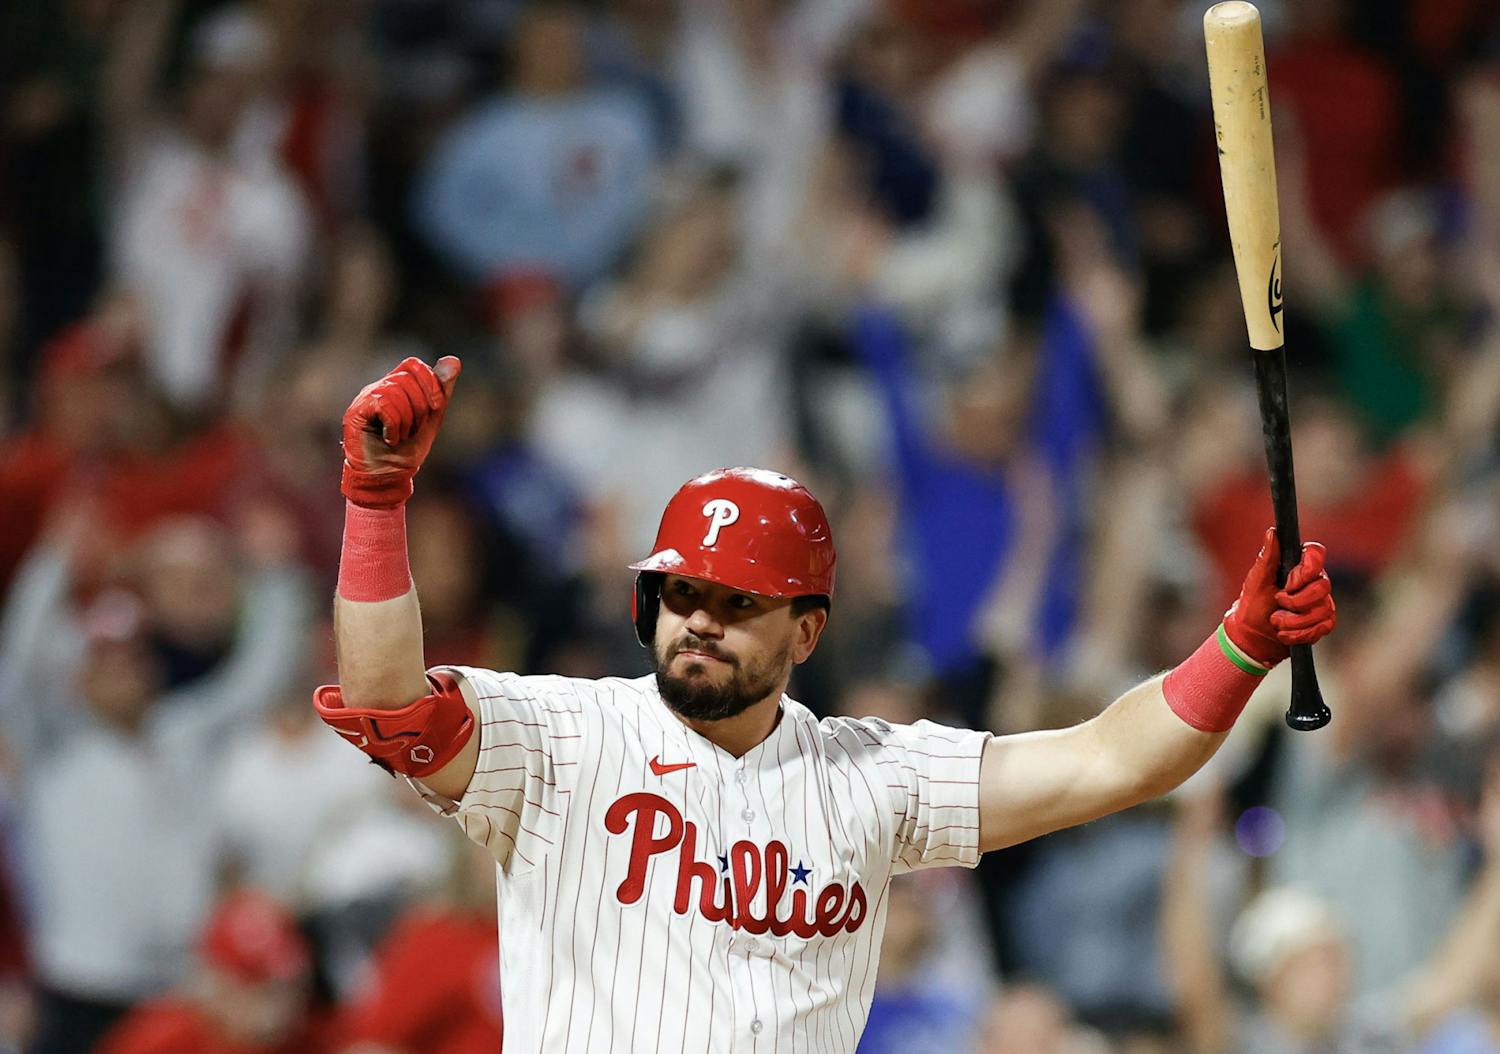 Kyle Schwarber and the Phillies had high praise for an 'electric